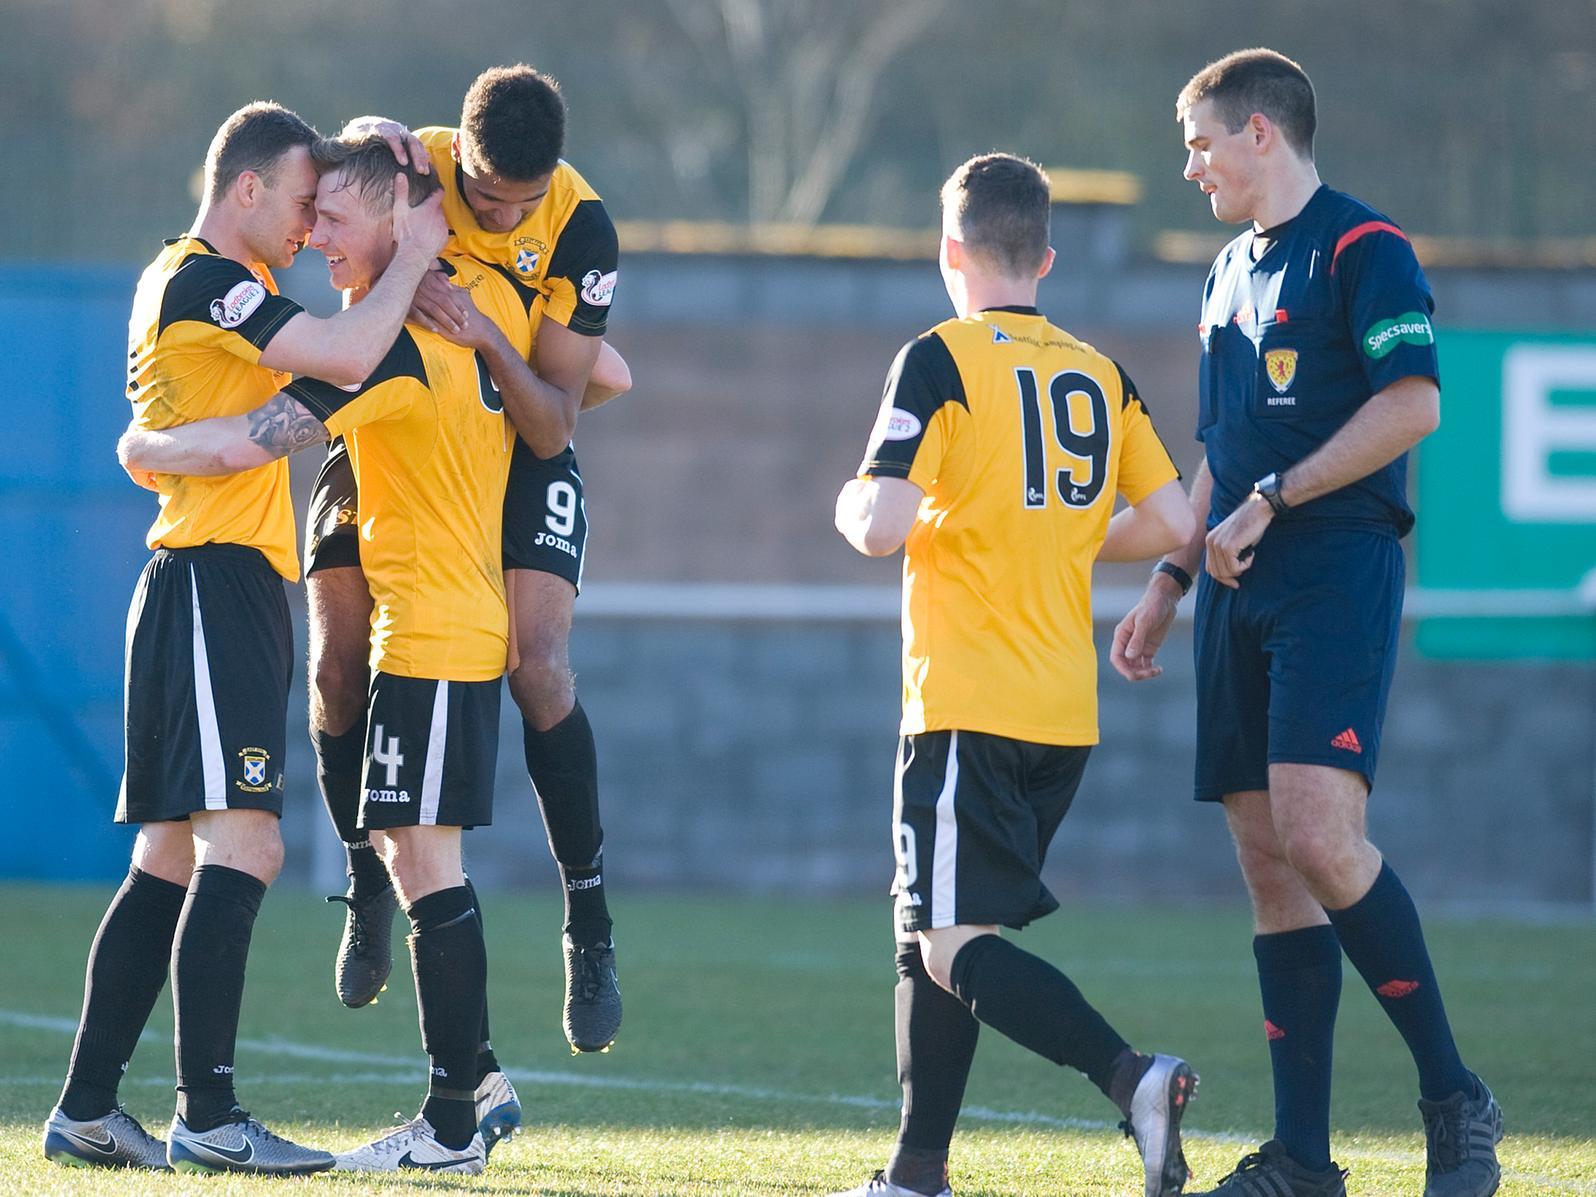 East Fife showed no jitters on their way to the League Two title, hammering Stirling Albion 6-0 in March 2016.